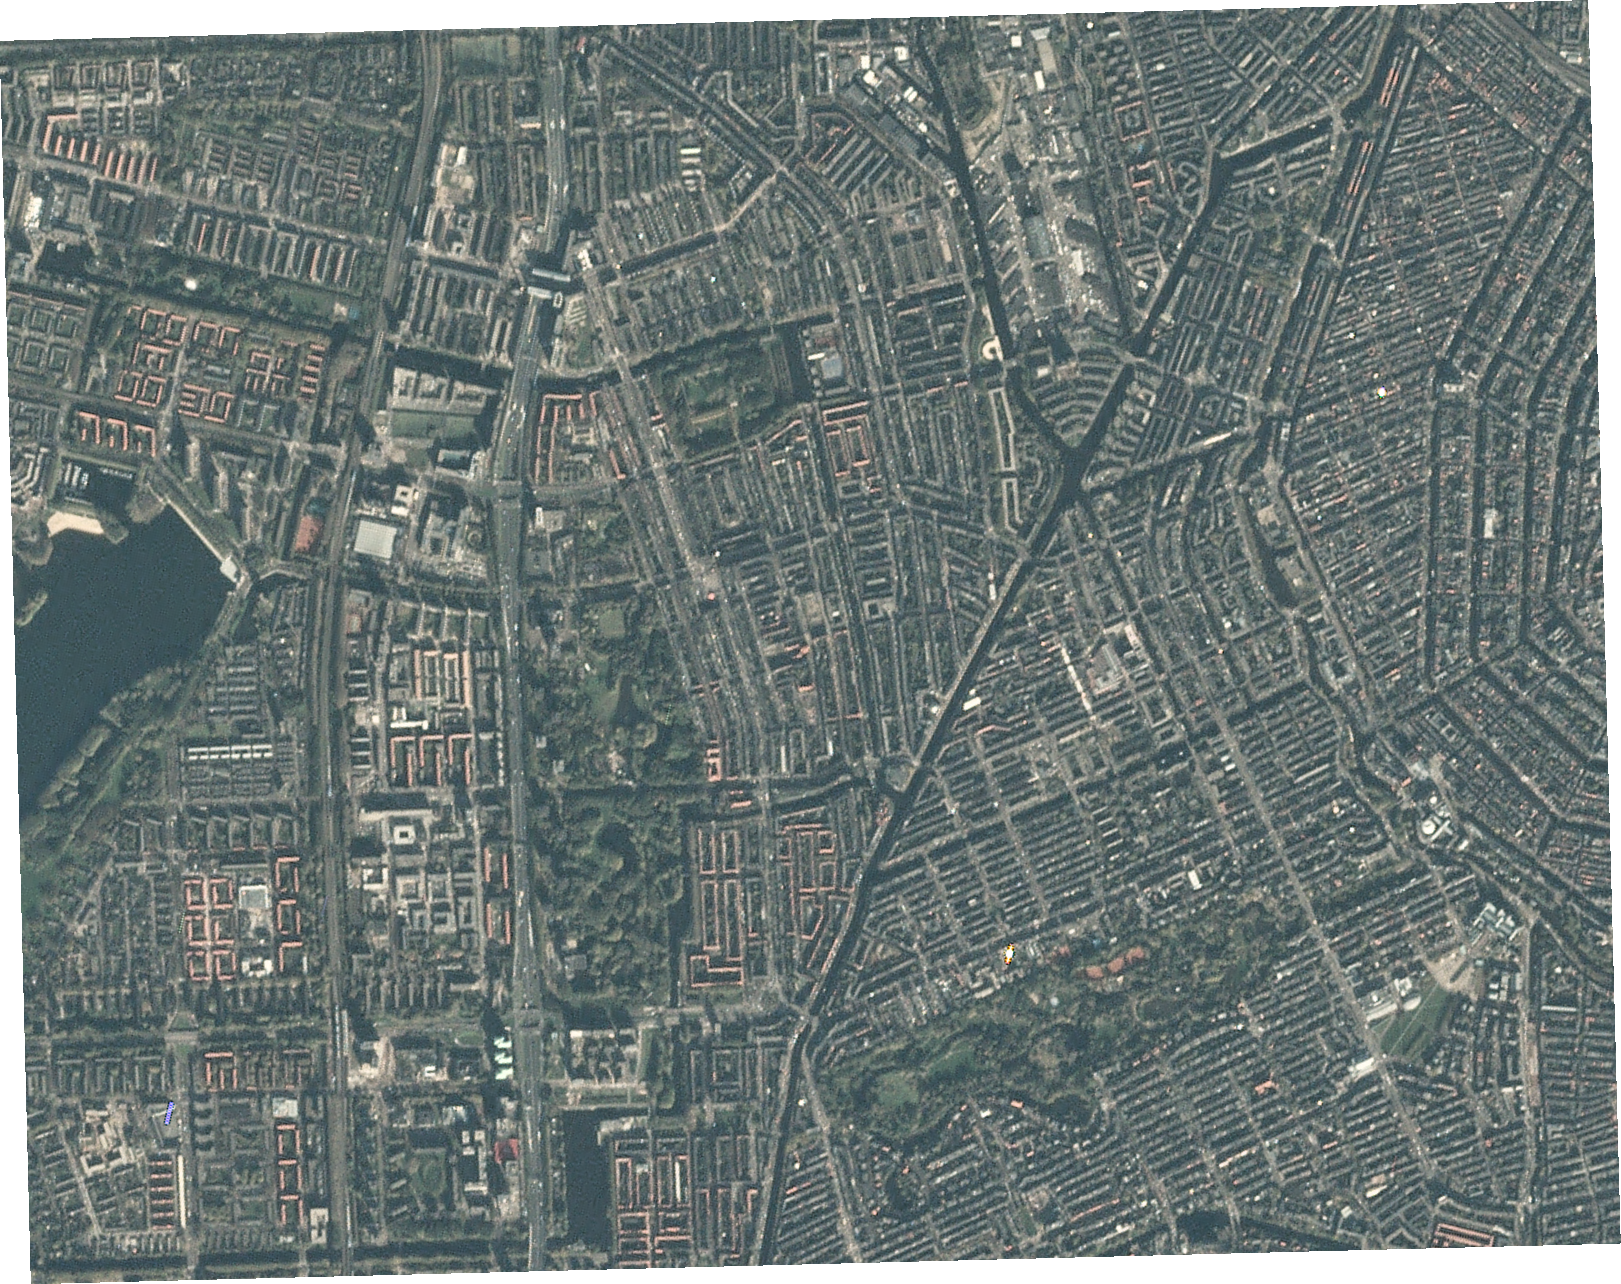 Satellite image of the city of Amsterdam